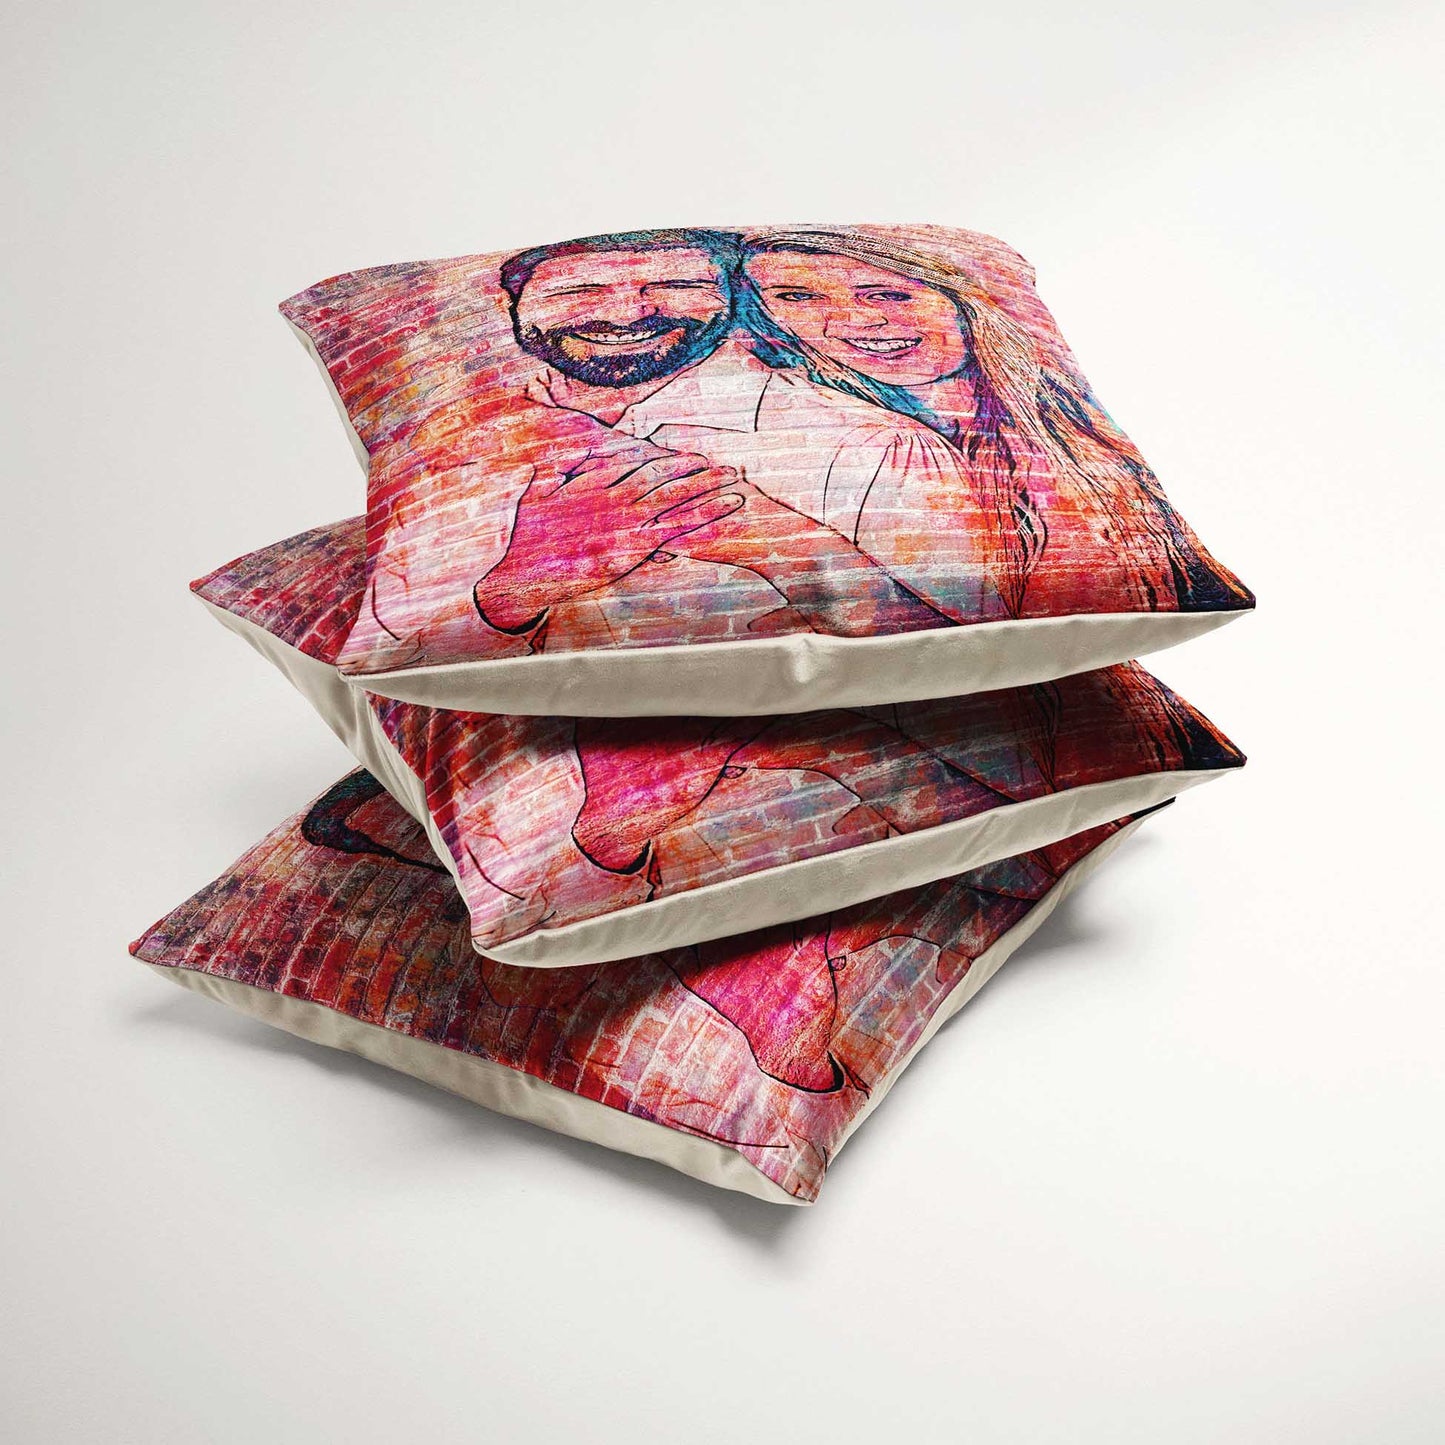 Elevate your decor with the Personalised Brick Graffiti Street Art Cushion. Handmade with precision and crafted from soft velvet, it provides a comfortable and luxurious touch. Customise it with a print from your photo